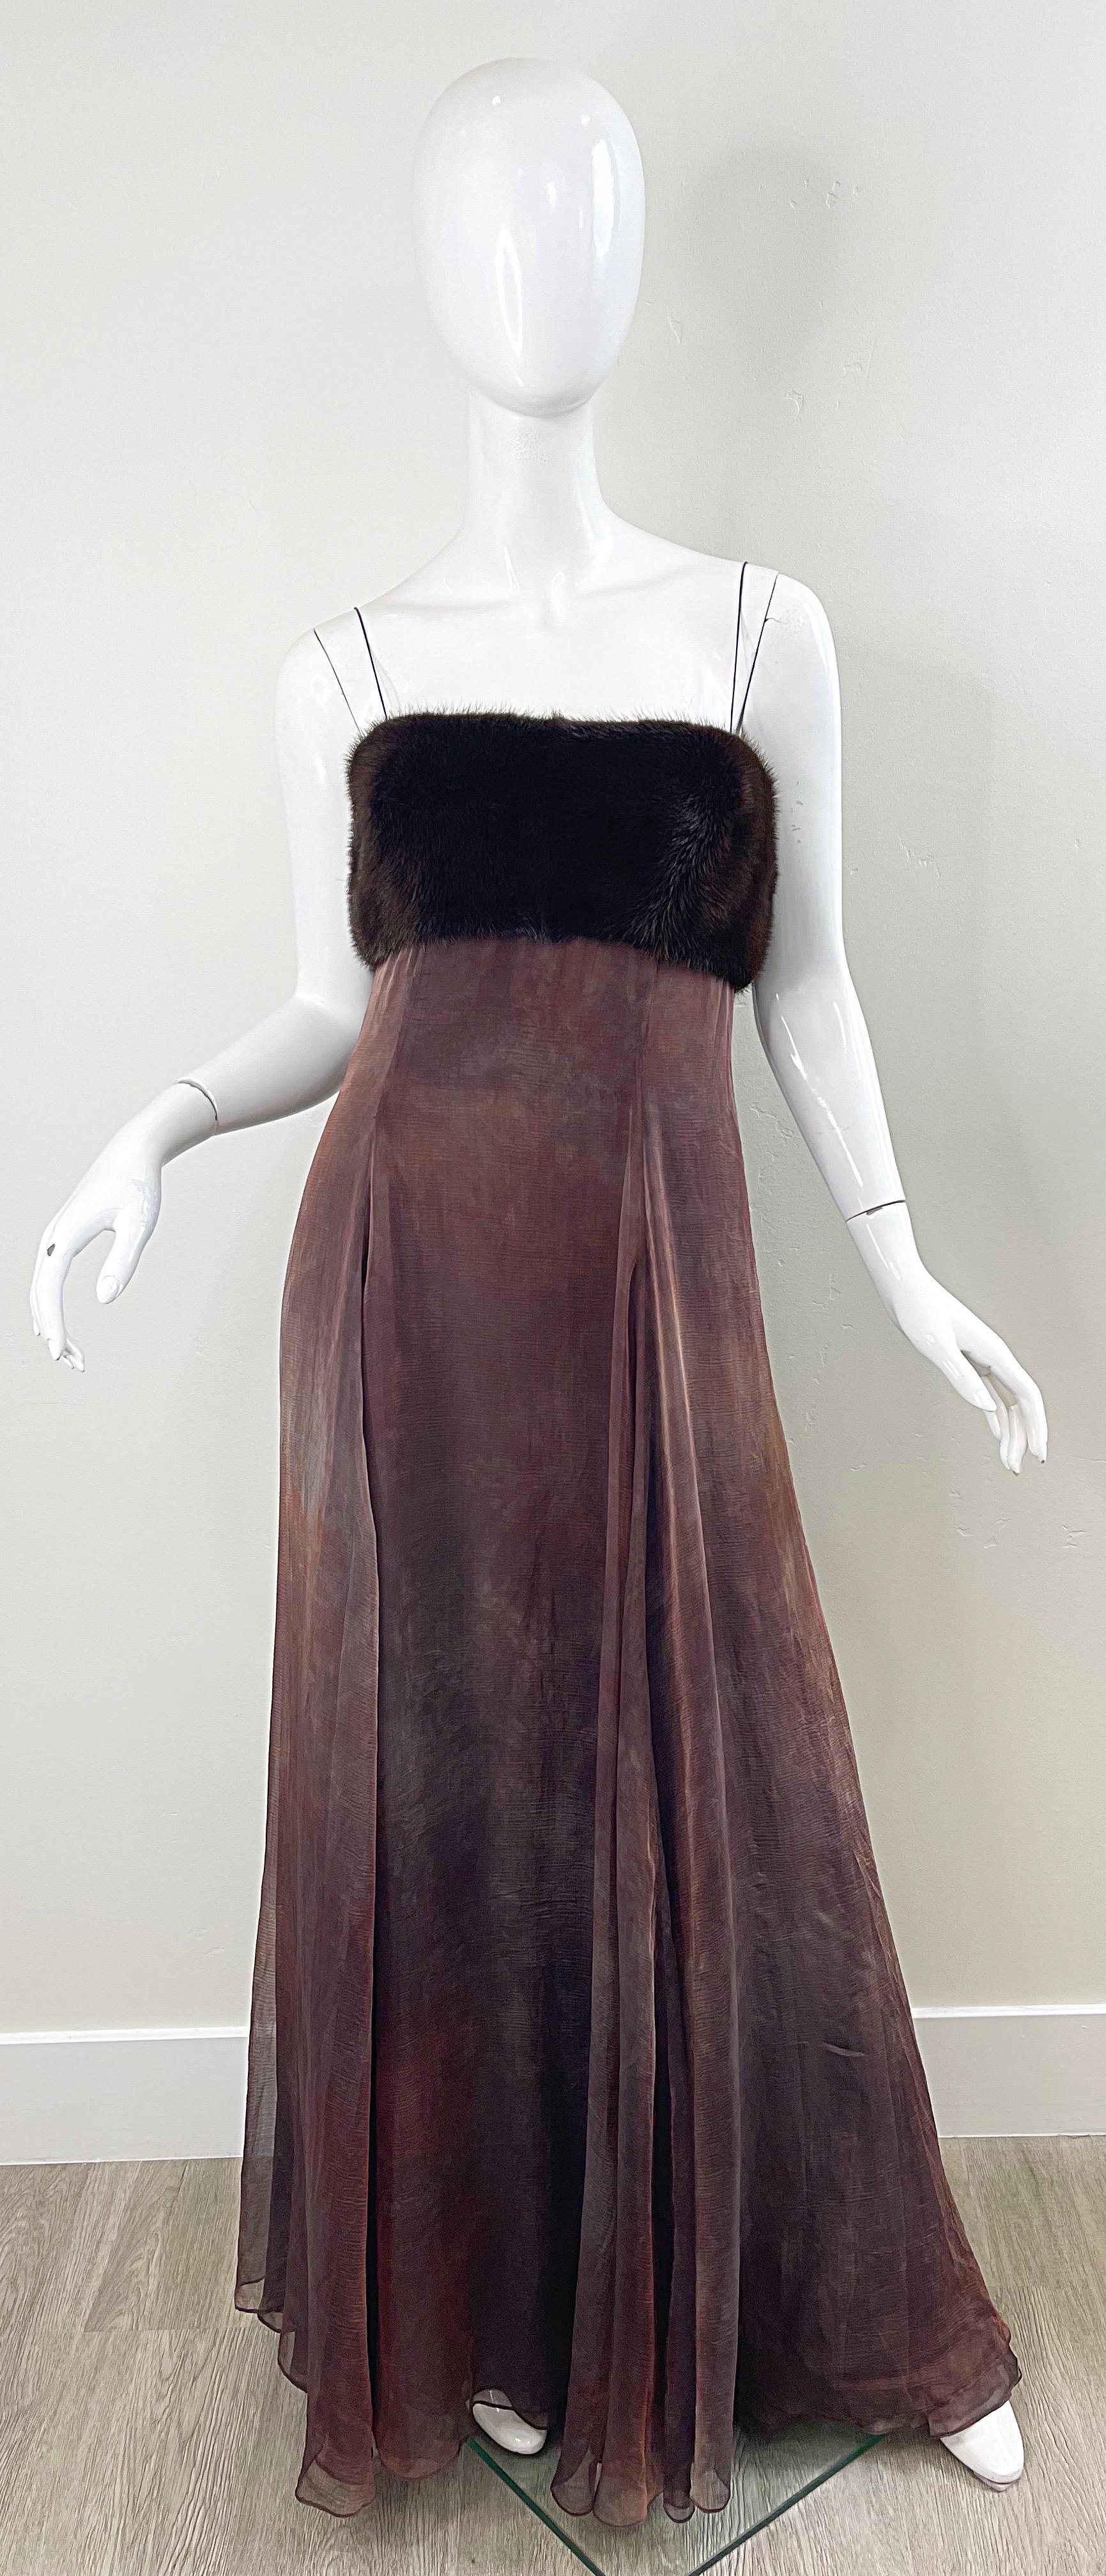 Stunning new with tags early 2000s HALSTON for SAKS 5th AVENUE, by Randolph Duke evening gown. Brown ombré silk chiffon trimmed in mink. This deadstock vintage dress features a flowing chiffon Grecian style silhouette with soft brown mink fur on the